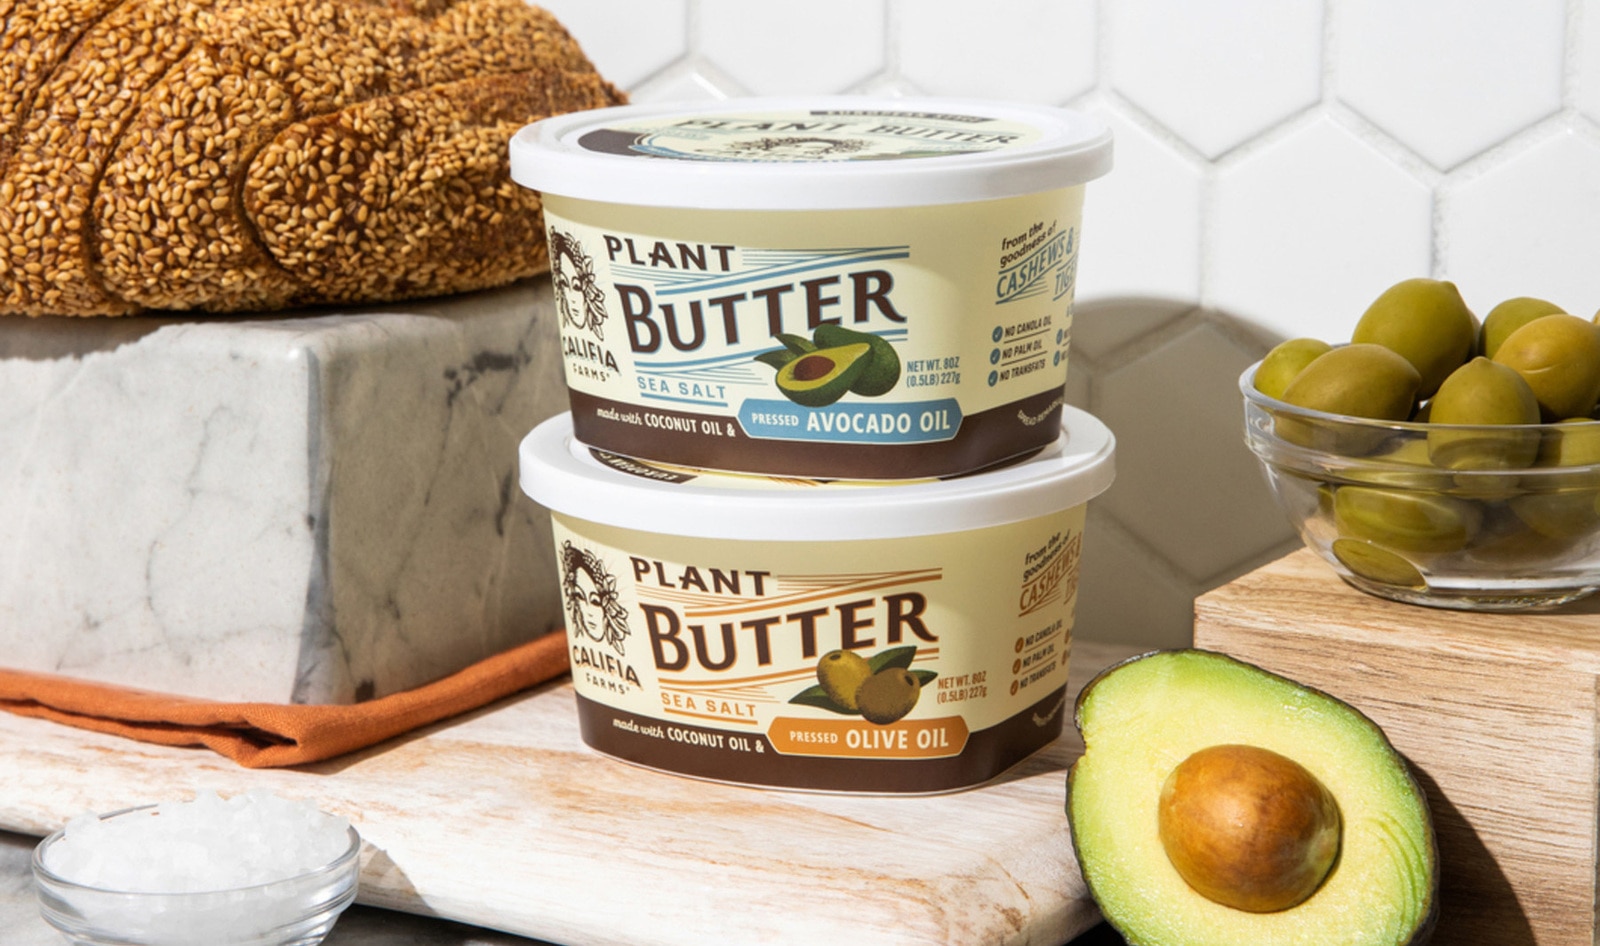 Califia Farms’ New Vegan Butter Launches at Target